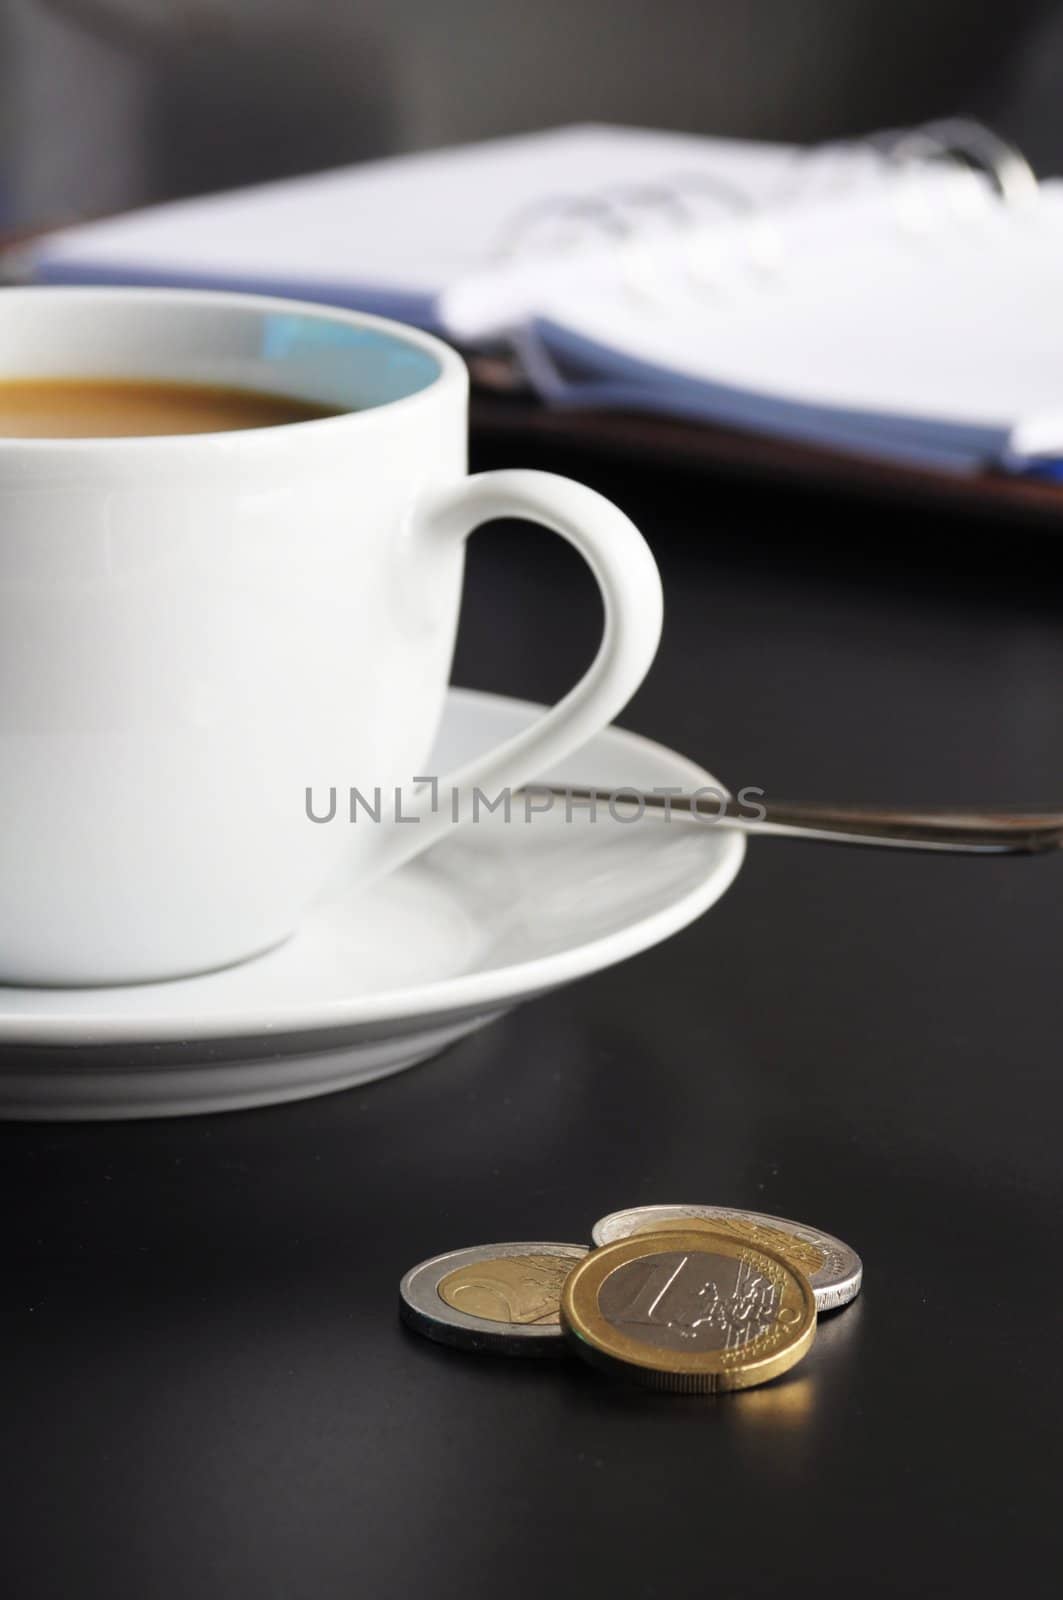 coffee and organizer in a black table showing break or breakfast in office